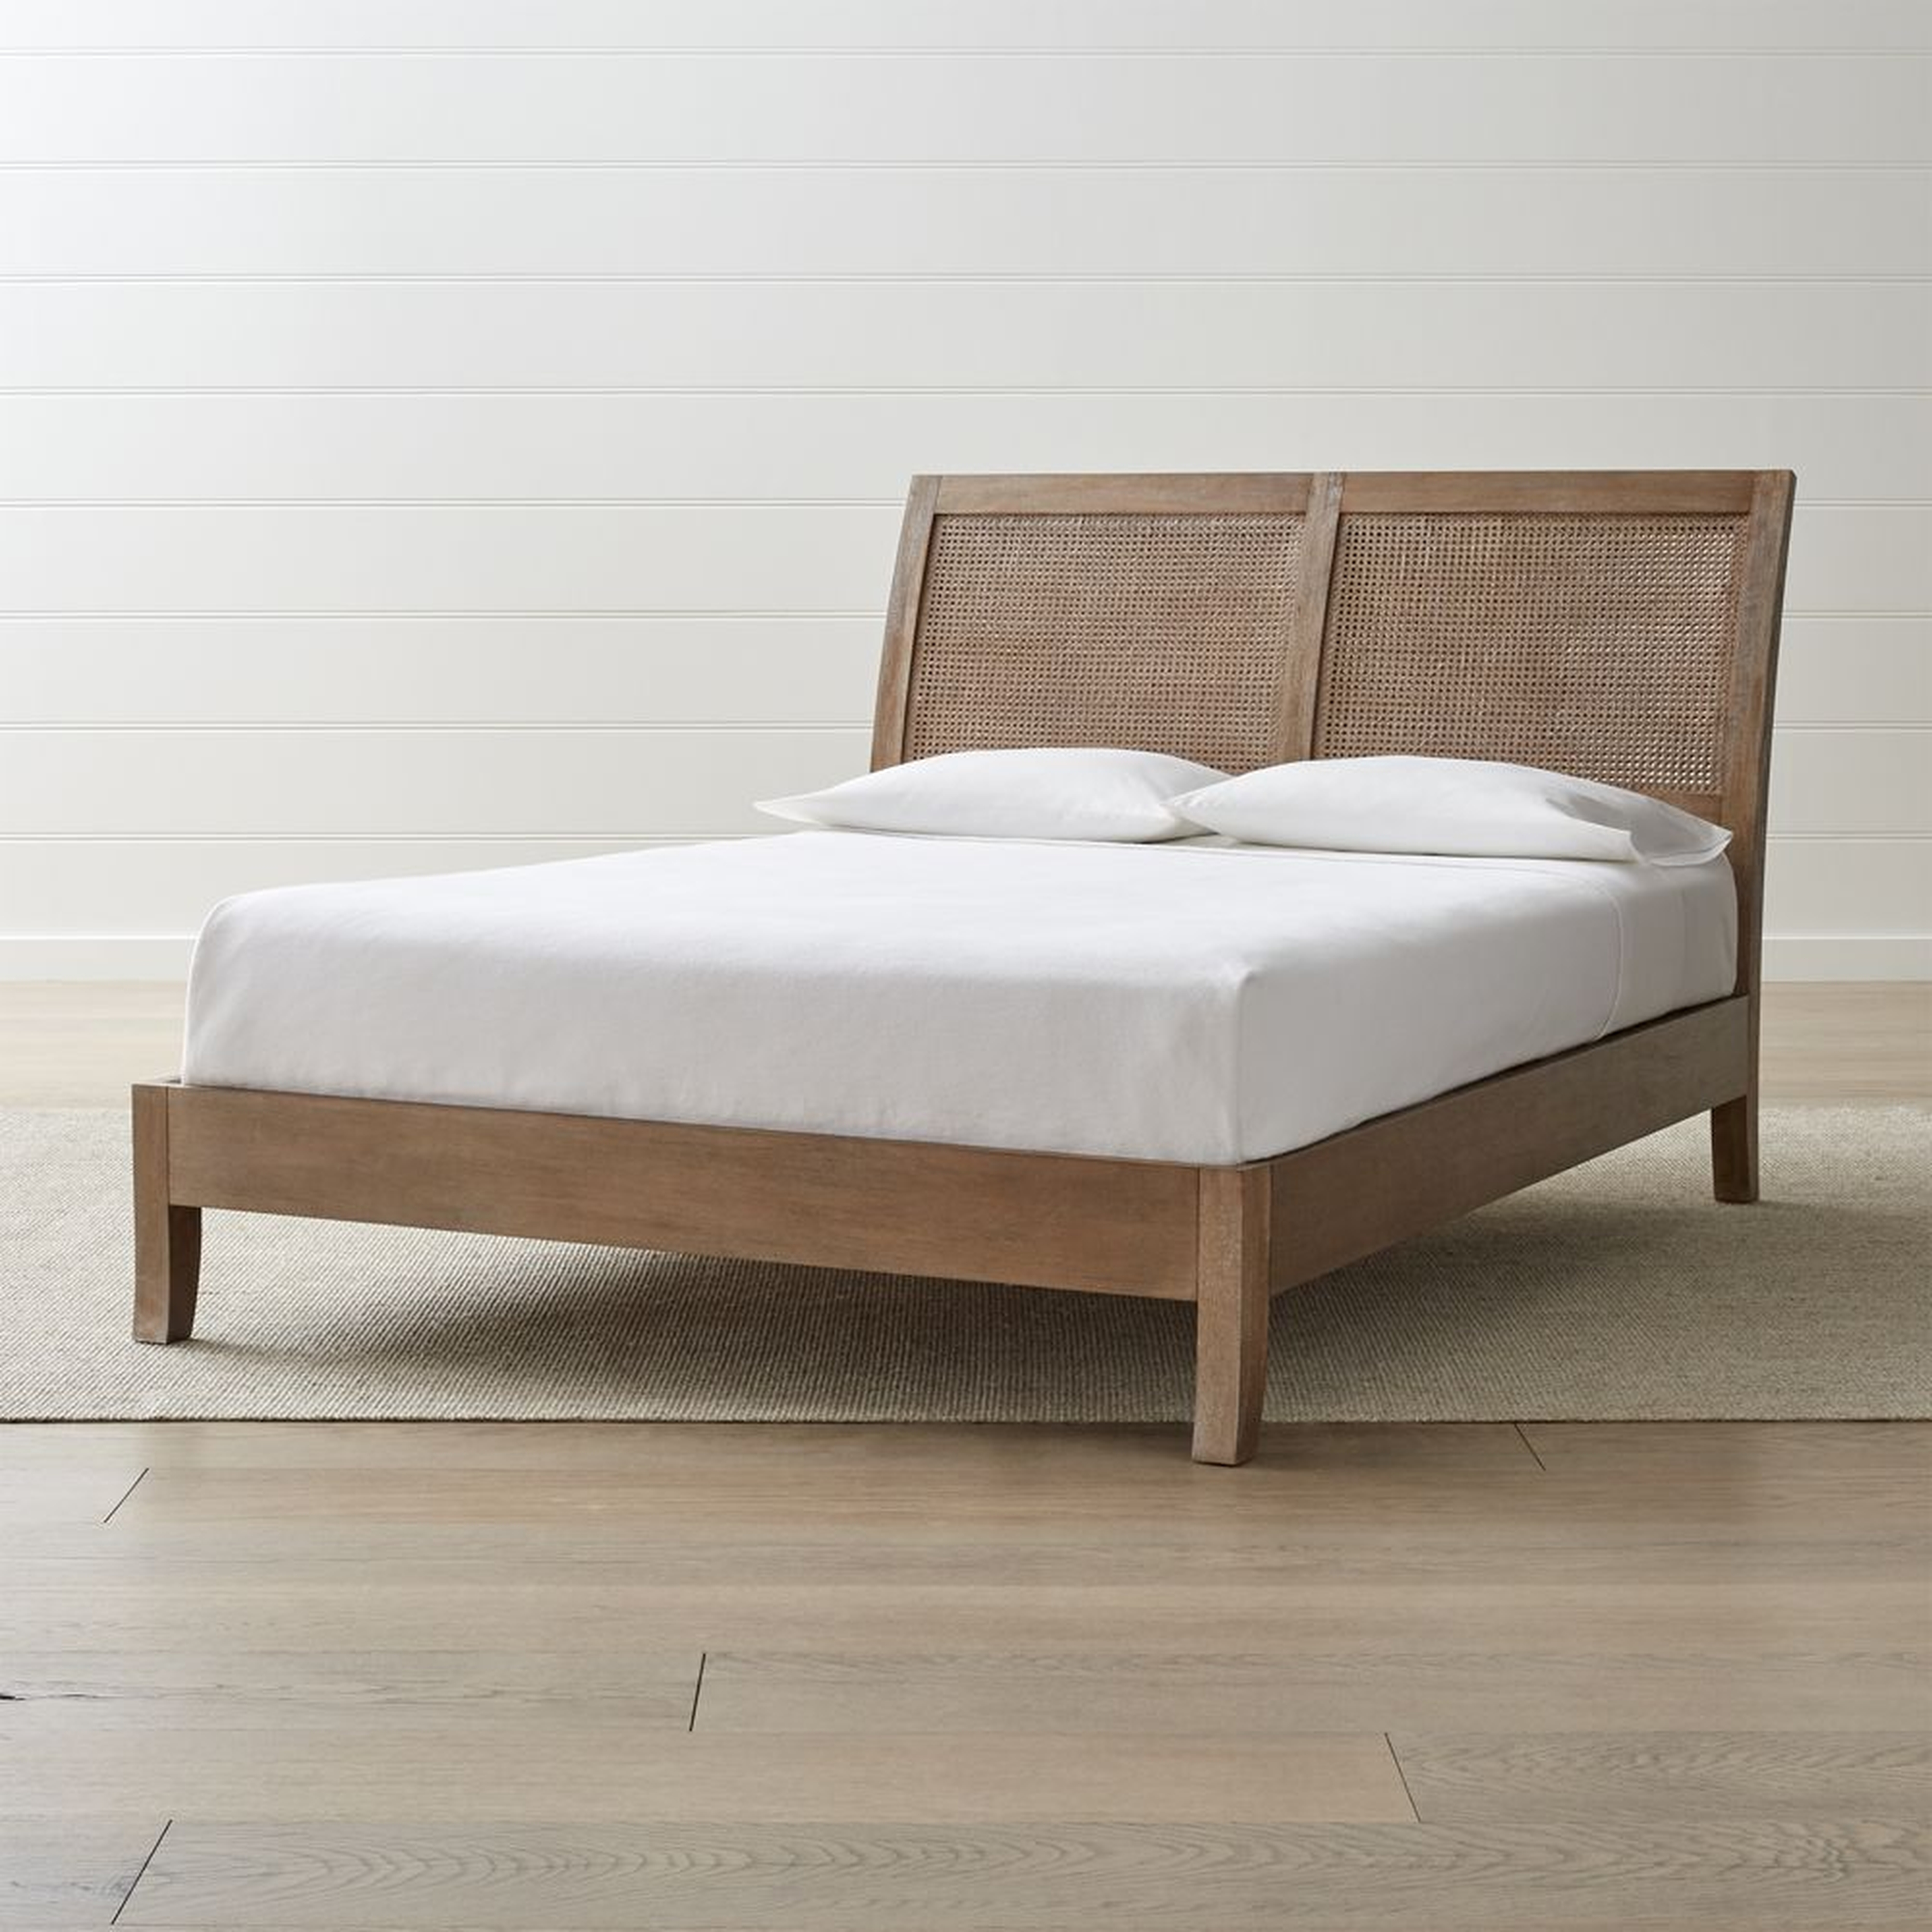 Dawson Grey Wash Cane Queen Bed - Crate and Barrel